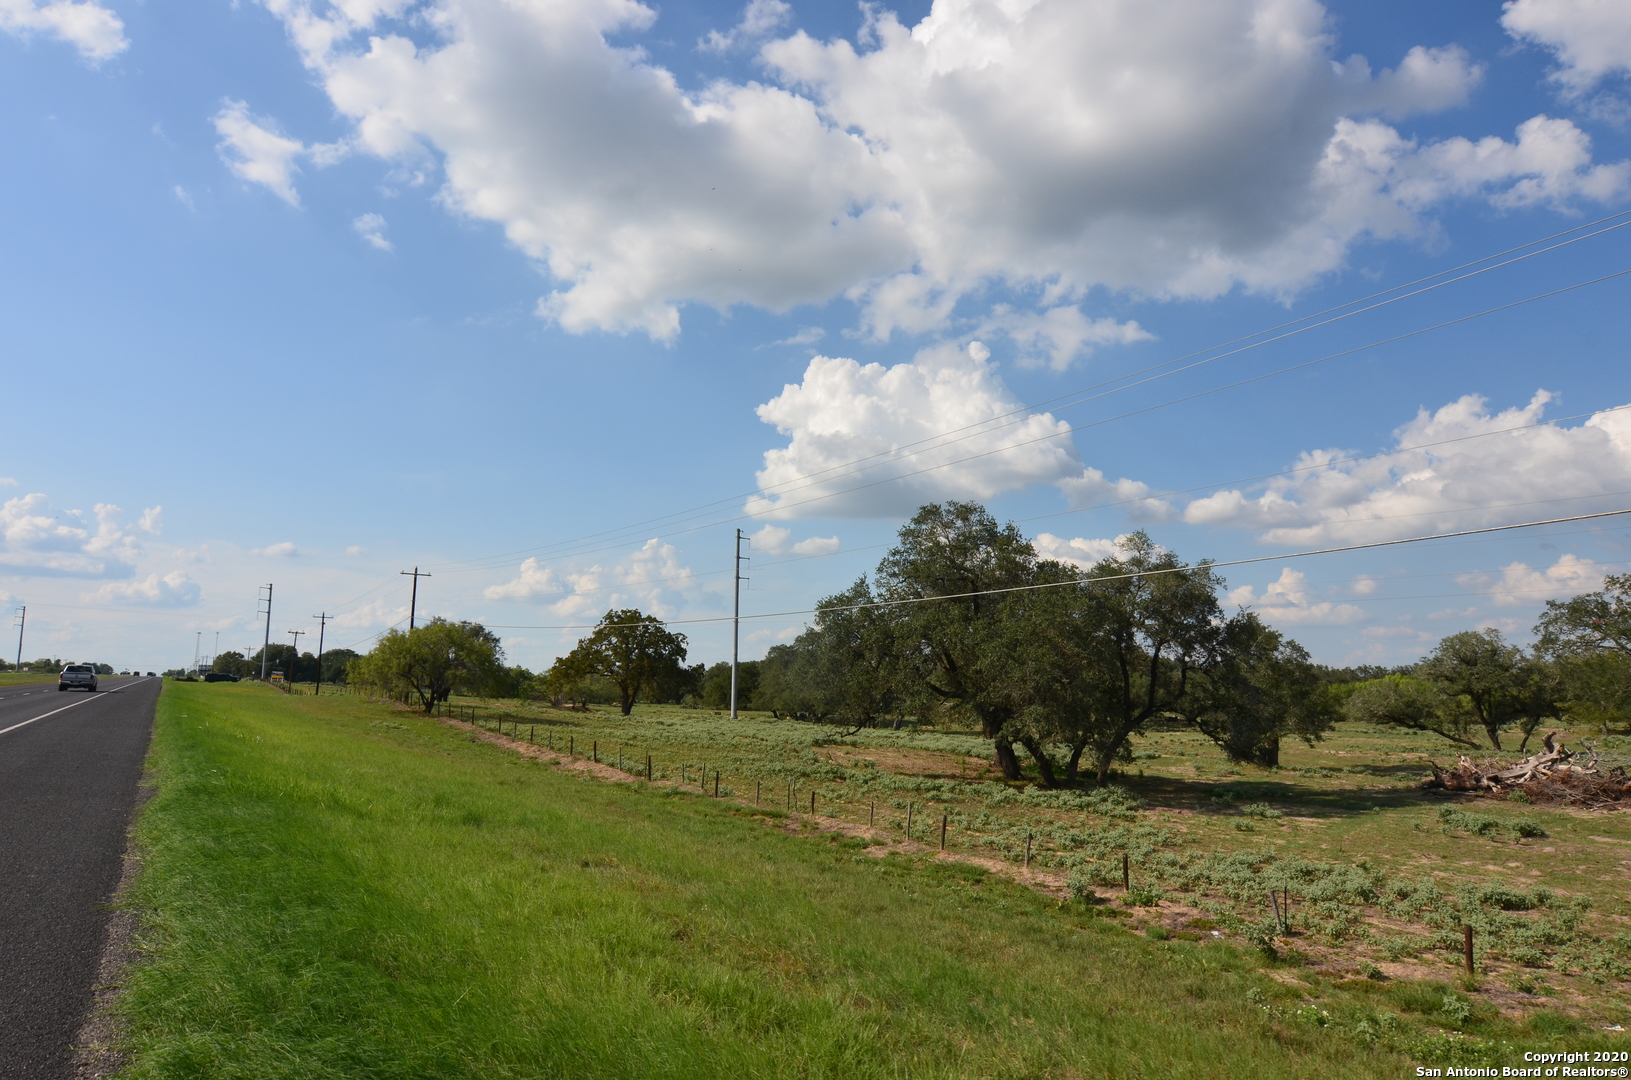 Unique land opportunity offering lots of frontage along US Highway 181.  Rolling hills, cleared fields, native pasture and tons of native oaks and other trees.  Nothing similar available between San Antonio and Floresville with simple access.